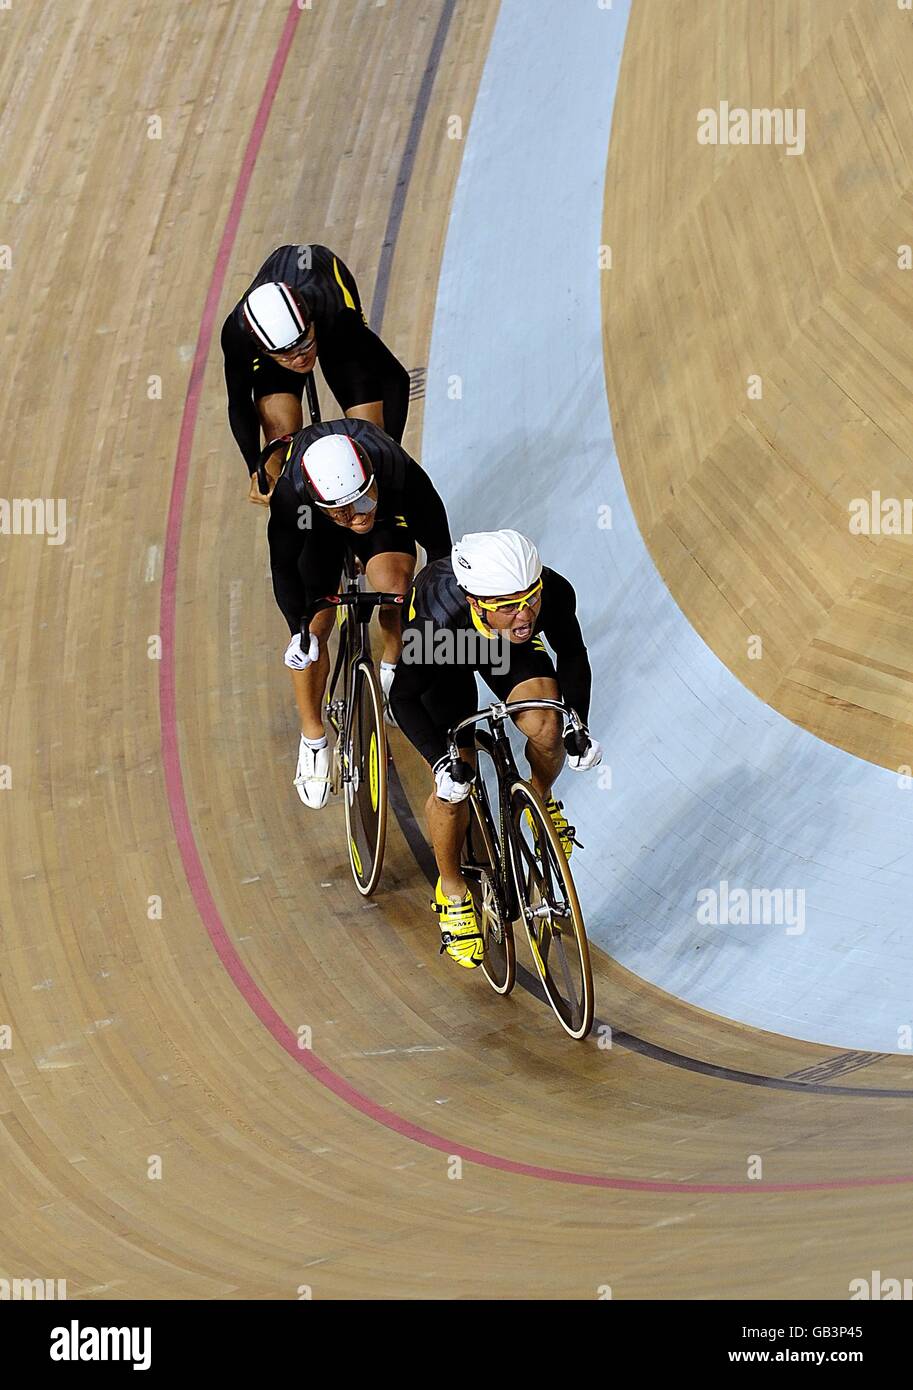 The Malaysian team in action during the qualifying round of the Track Cycling Men's Team Sprint event at the Losham Velodrome in Beijing, China, during the 2008 Beijing Olympic Games. Stock Photo